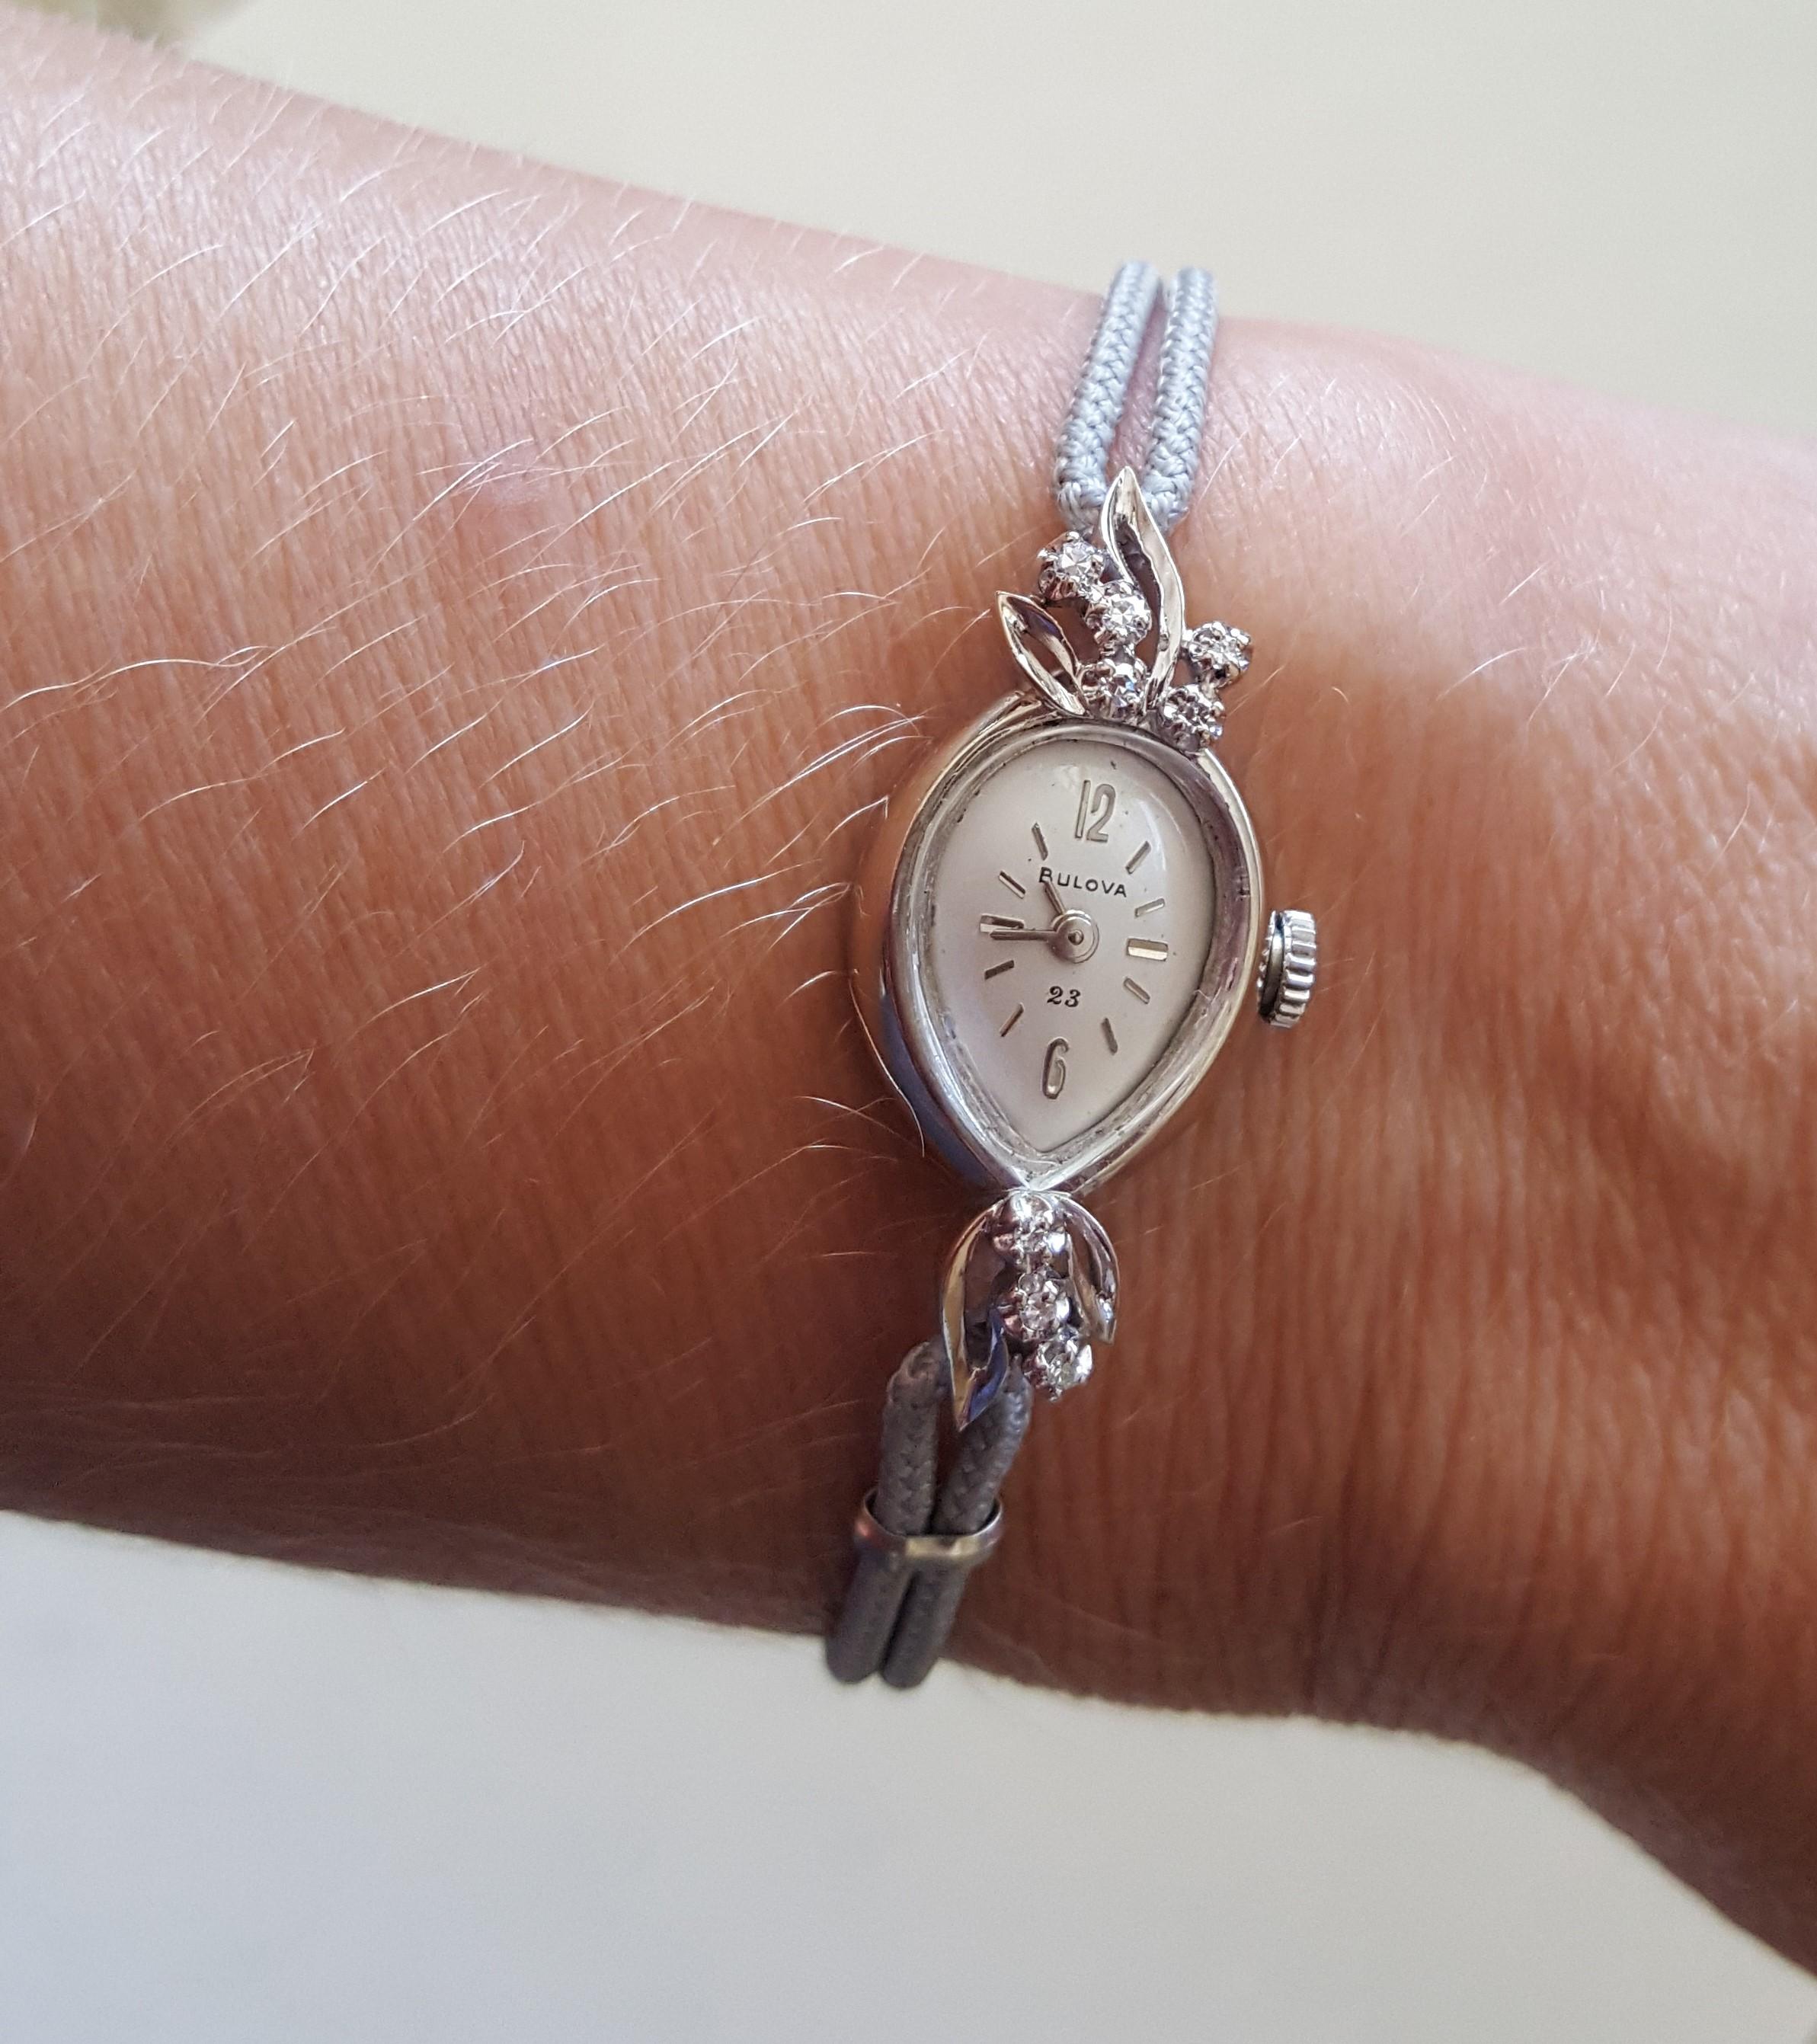 Vintage 14kt White Gold Bulova Ladies Watch, 23 Jewel, Very Good Condition, 8 Diamonds of approximately .16cttw, f/g color, clarity, Working, 18mm x 14mm Case, Thick Crystal. The watch is 6.5 inches long total, each side of the rope bracelet is 2